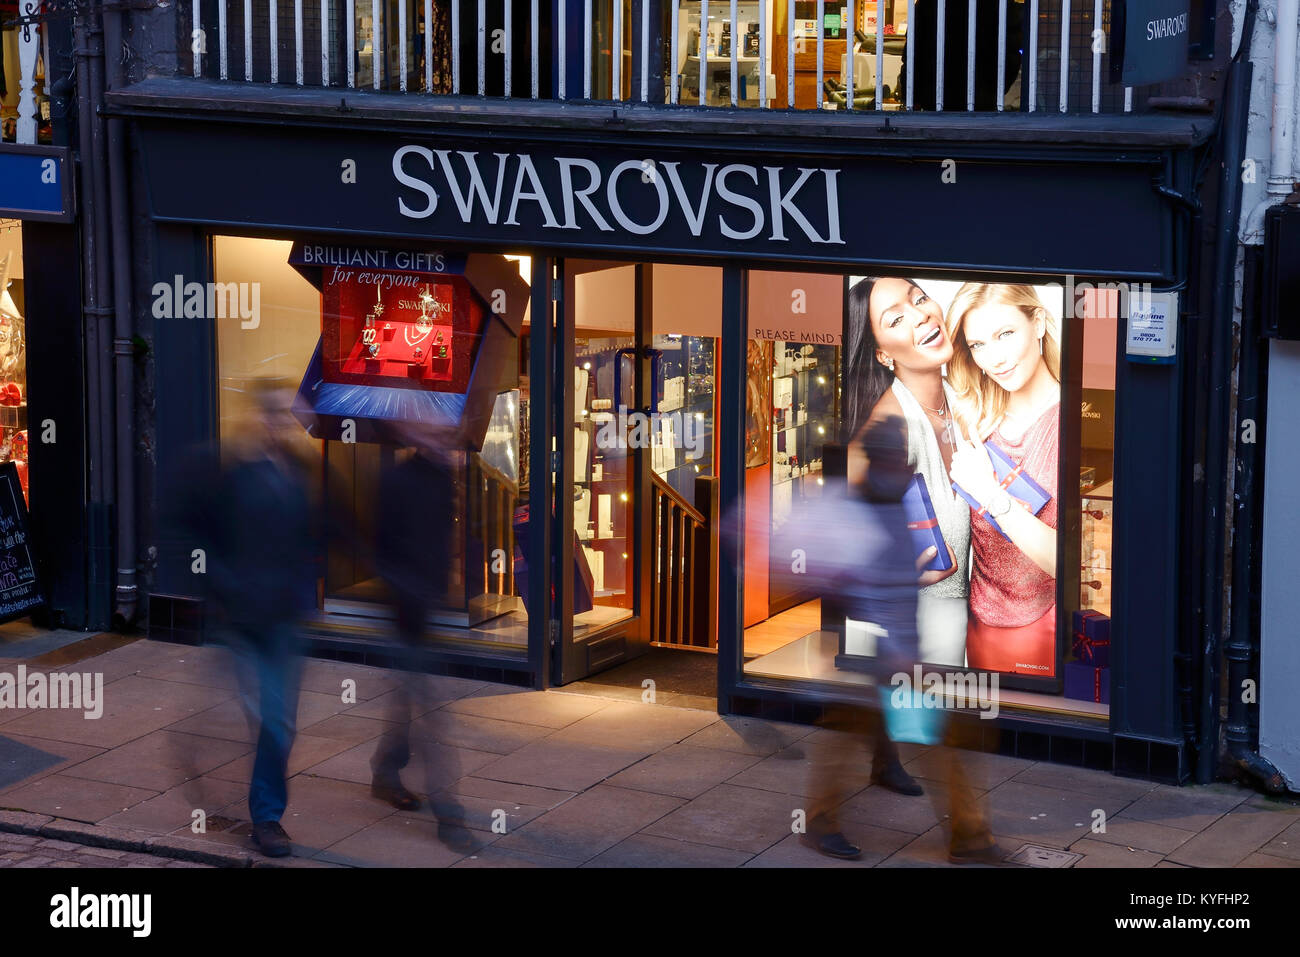 Swarovski Shop Front High Resolution Stock Photography and Images - Alamy